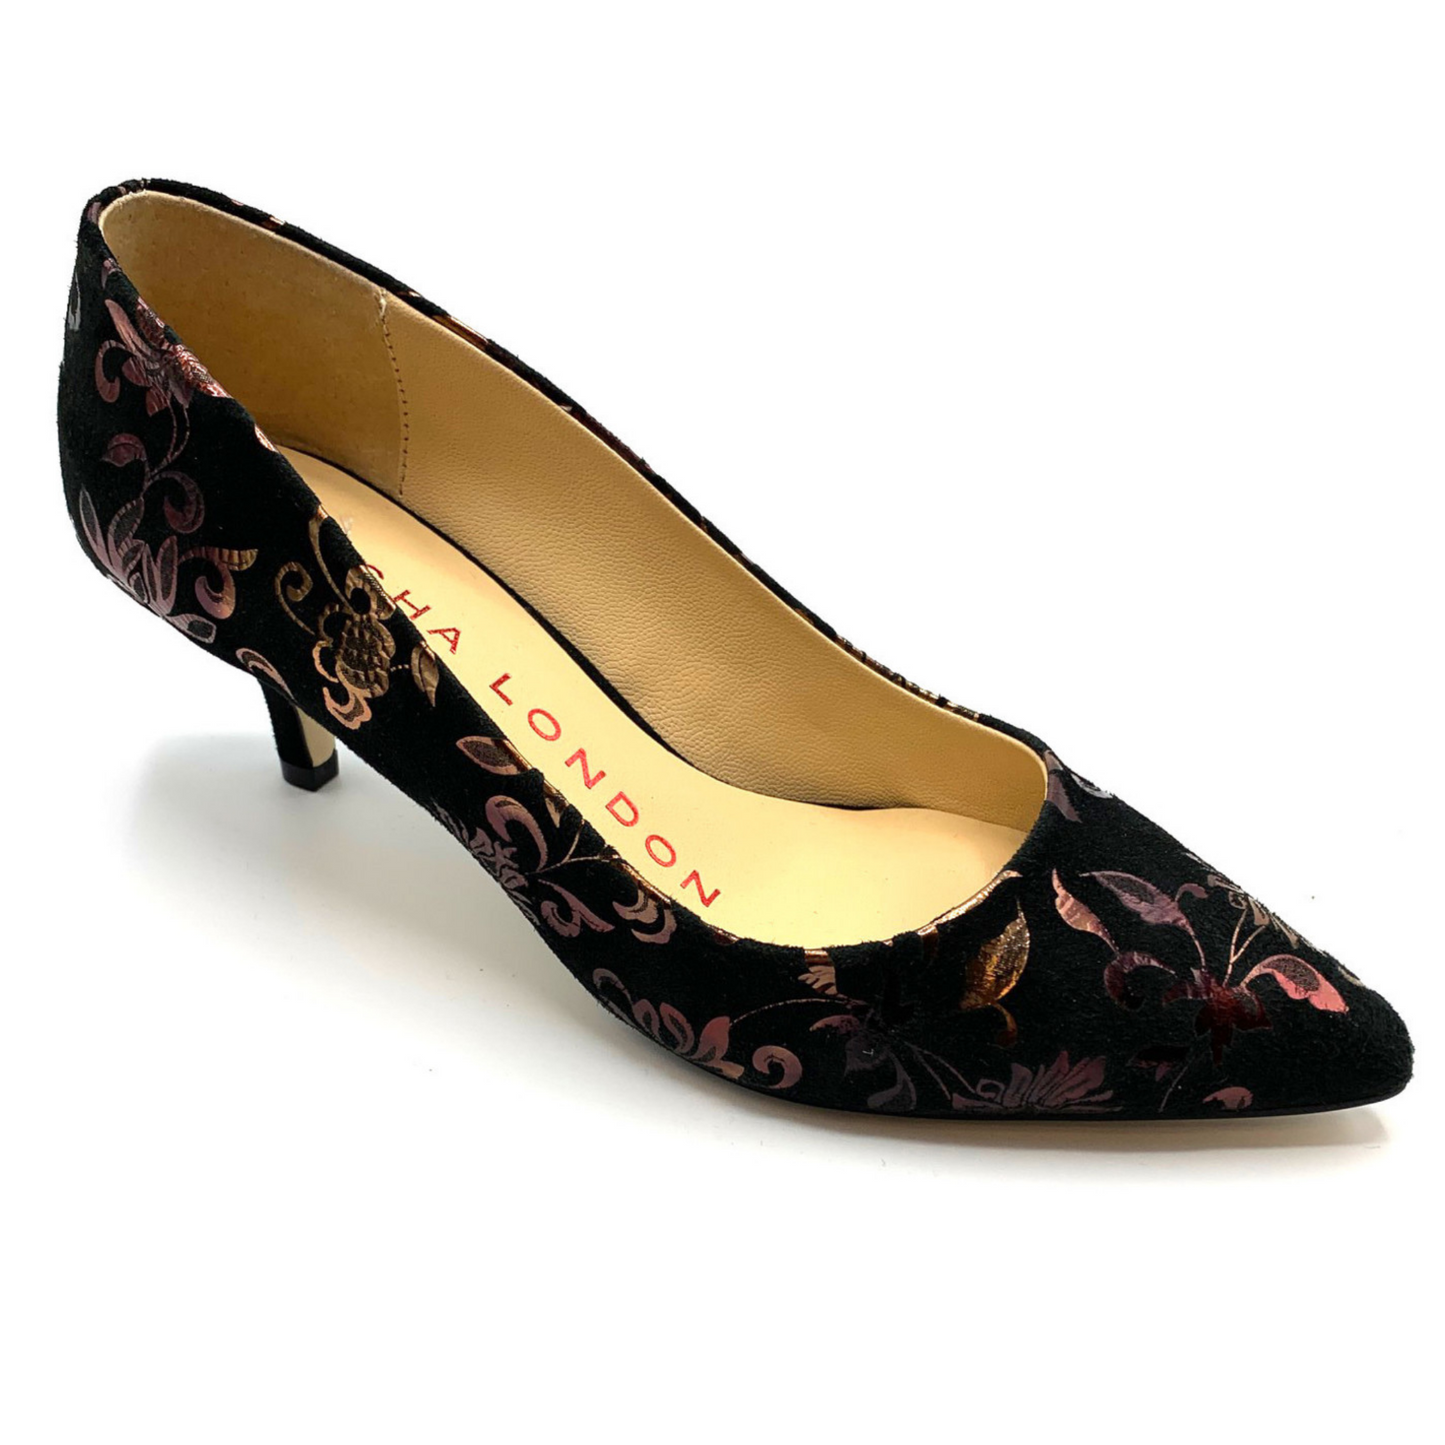 A view of the right side of the heel, showing the 2 inch kitten heel and the pretty flower print.